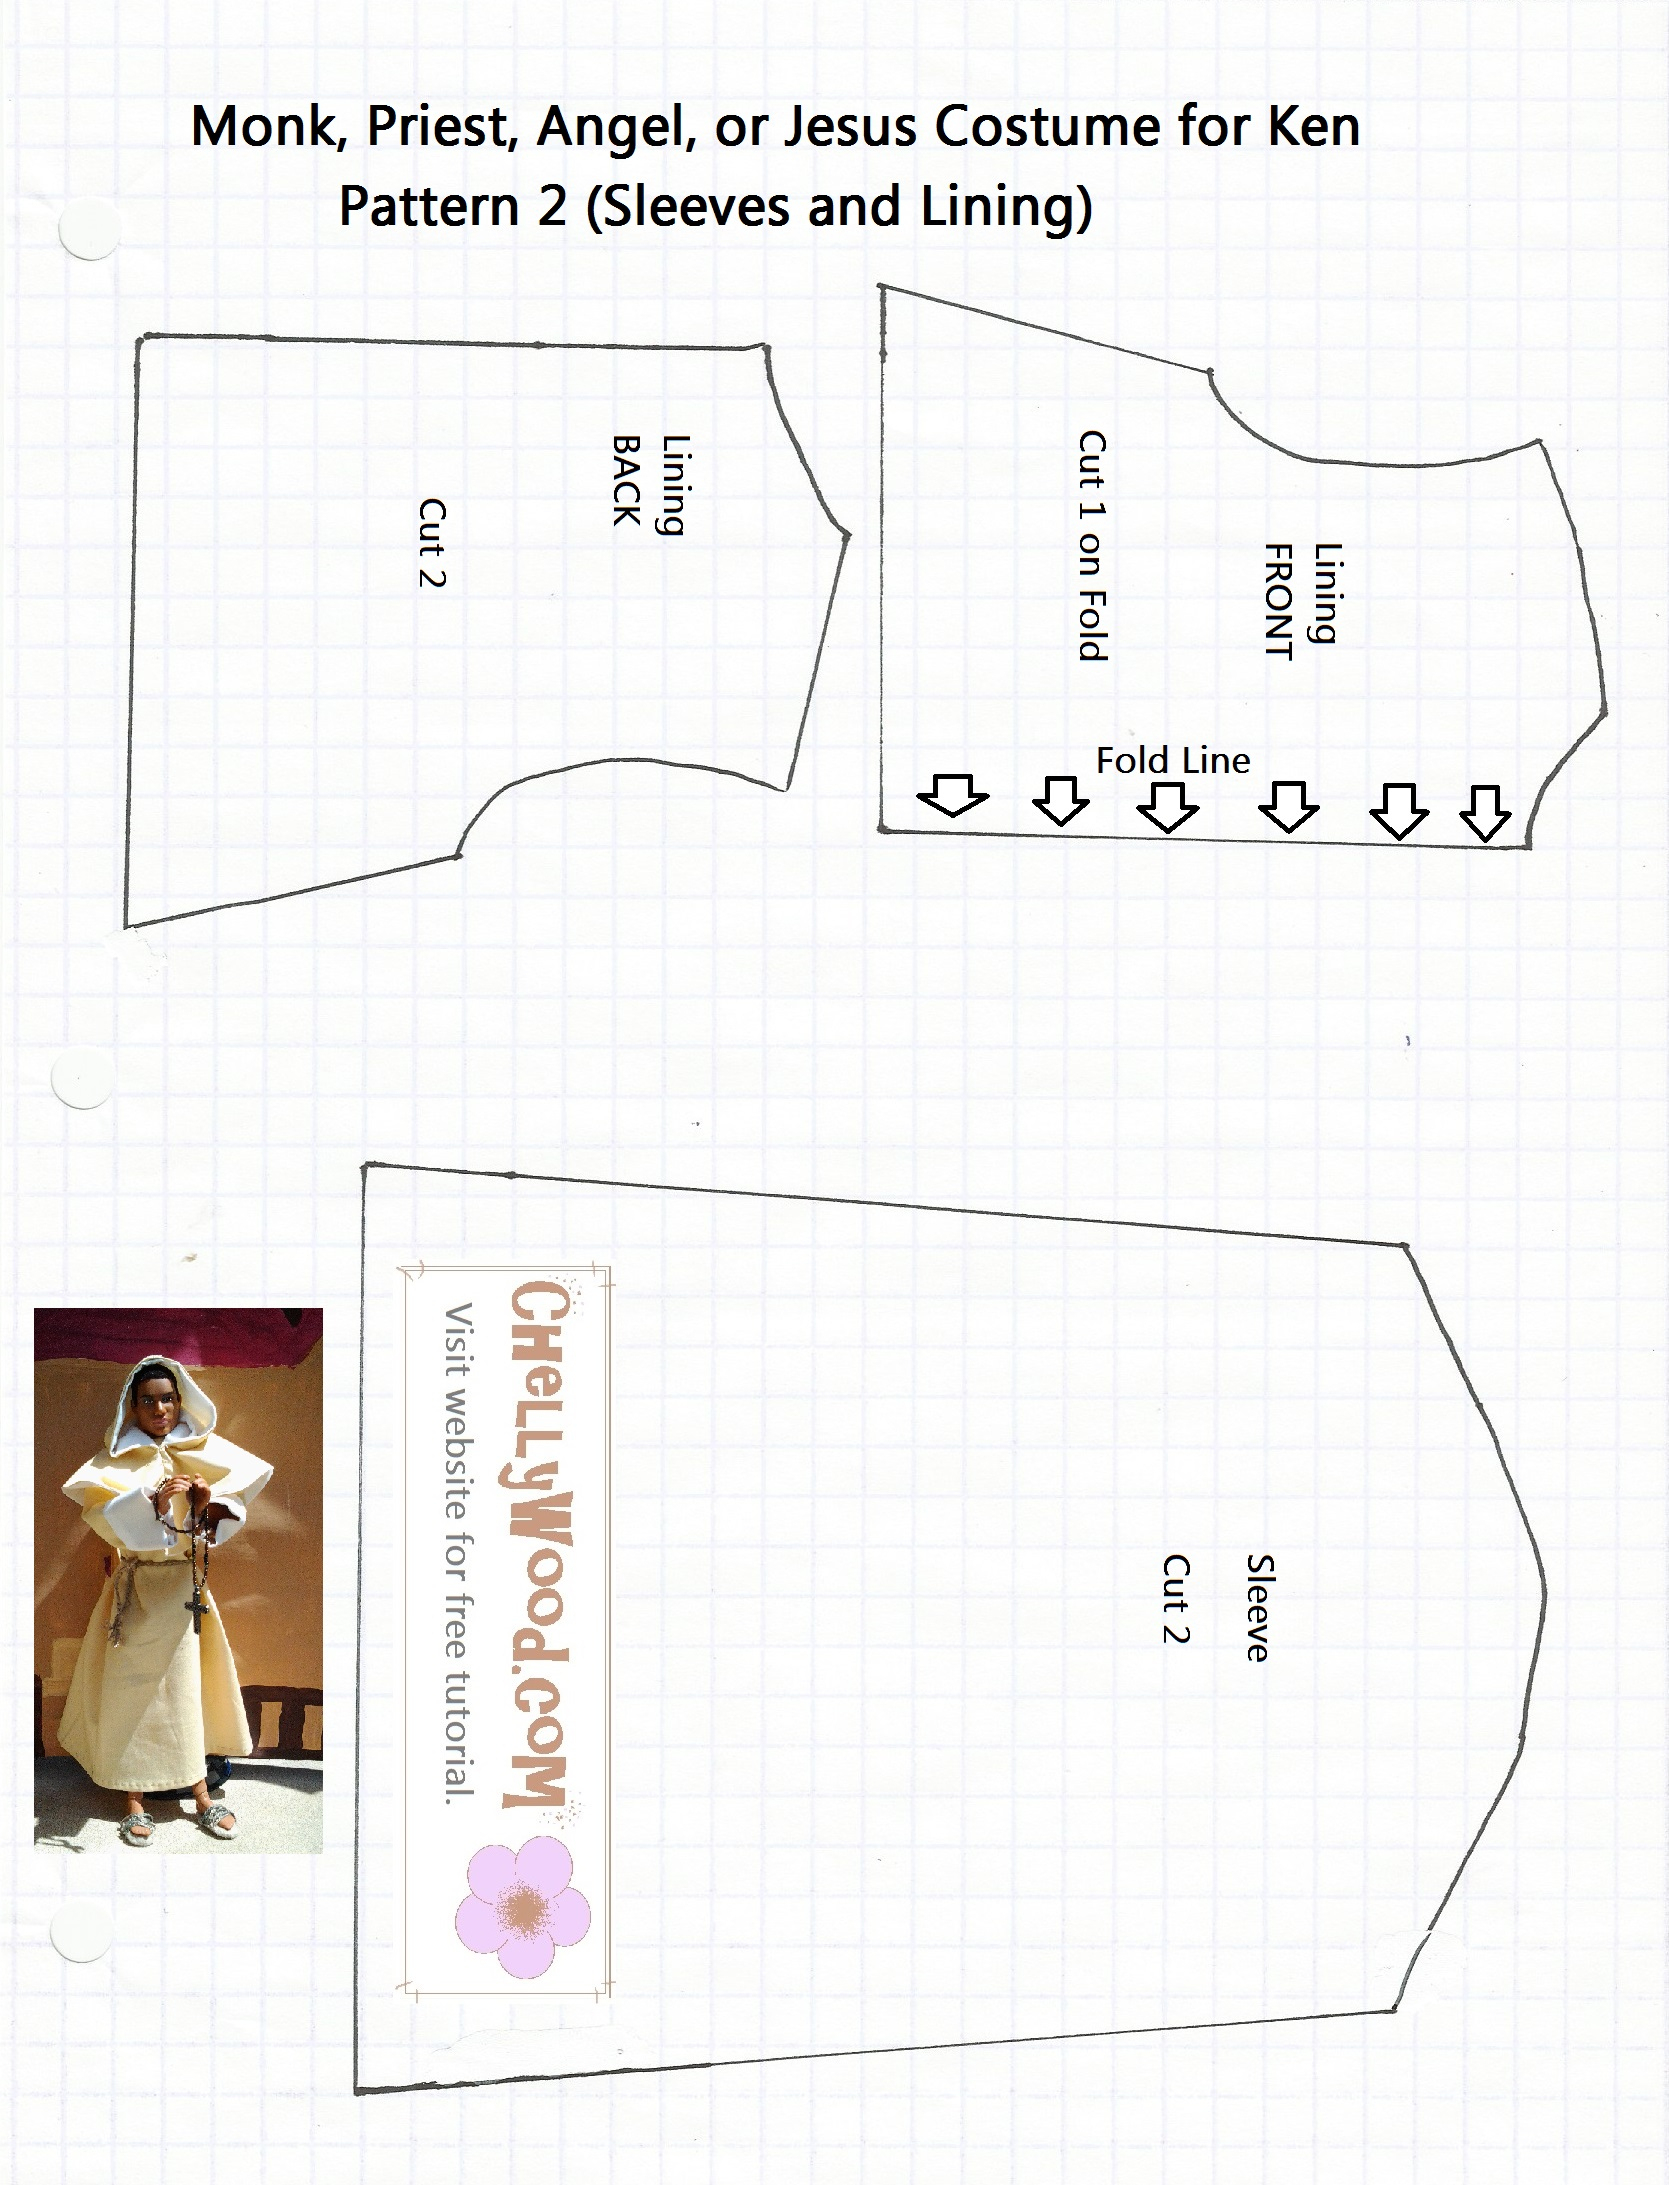 Free Printable Barbie Doll Clothes Patterns – Chellywood - Easy Barbie Clothes Patterns Free Printable